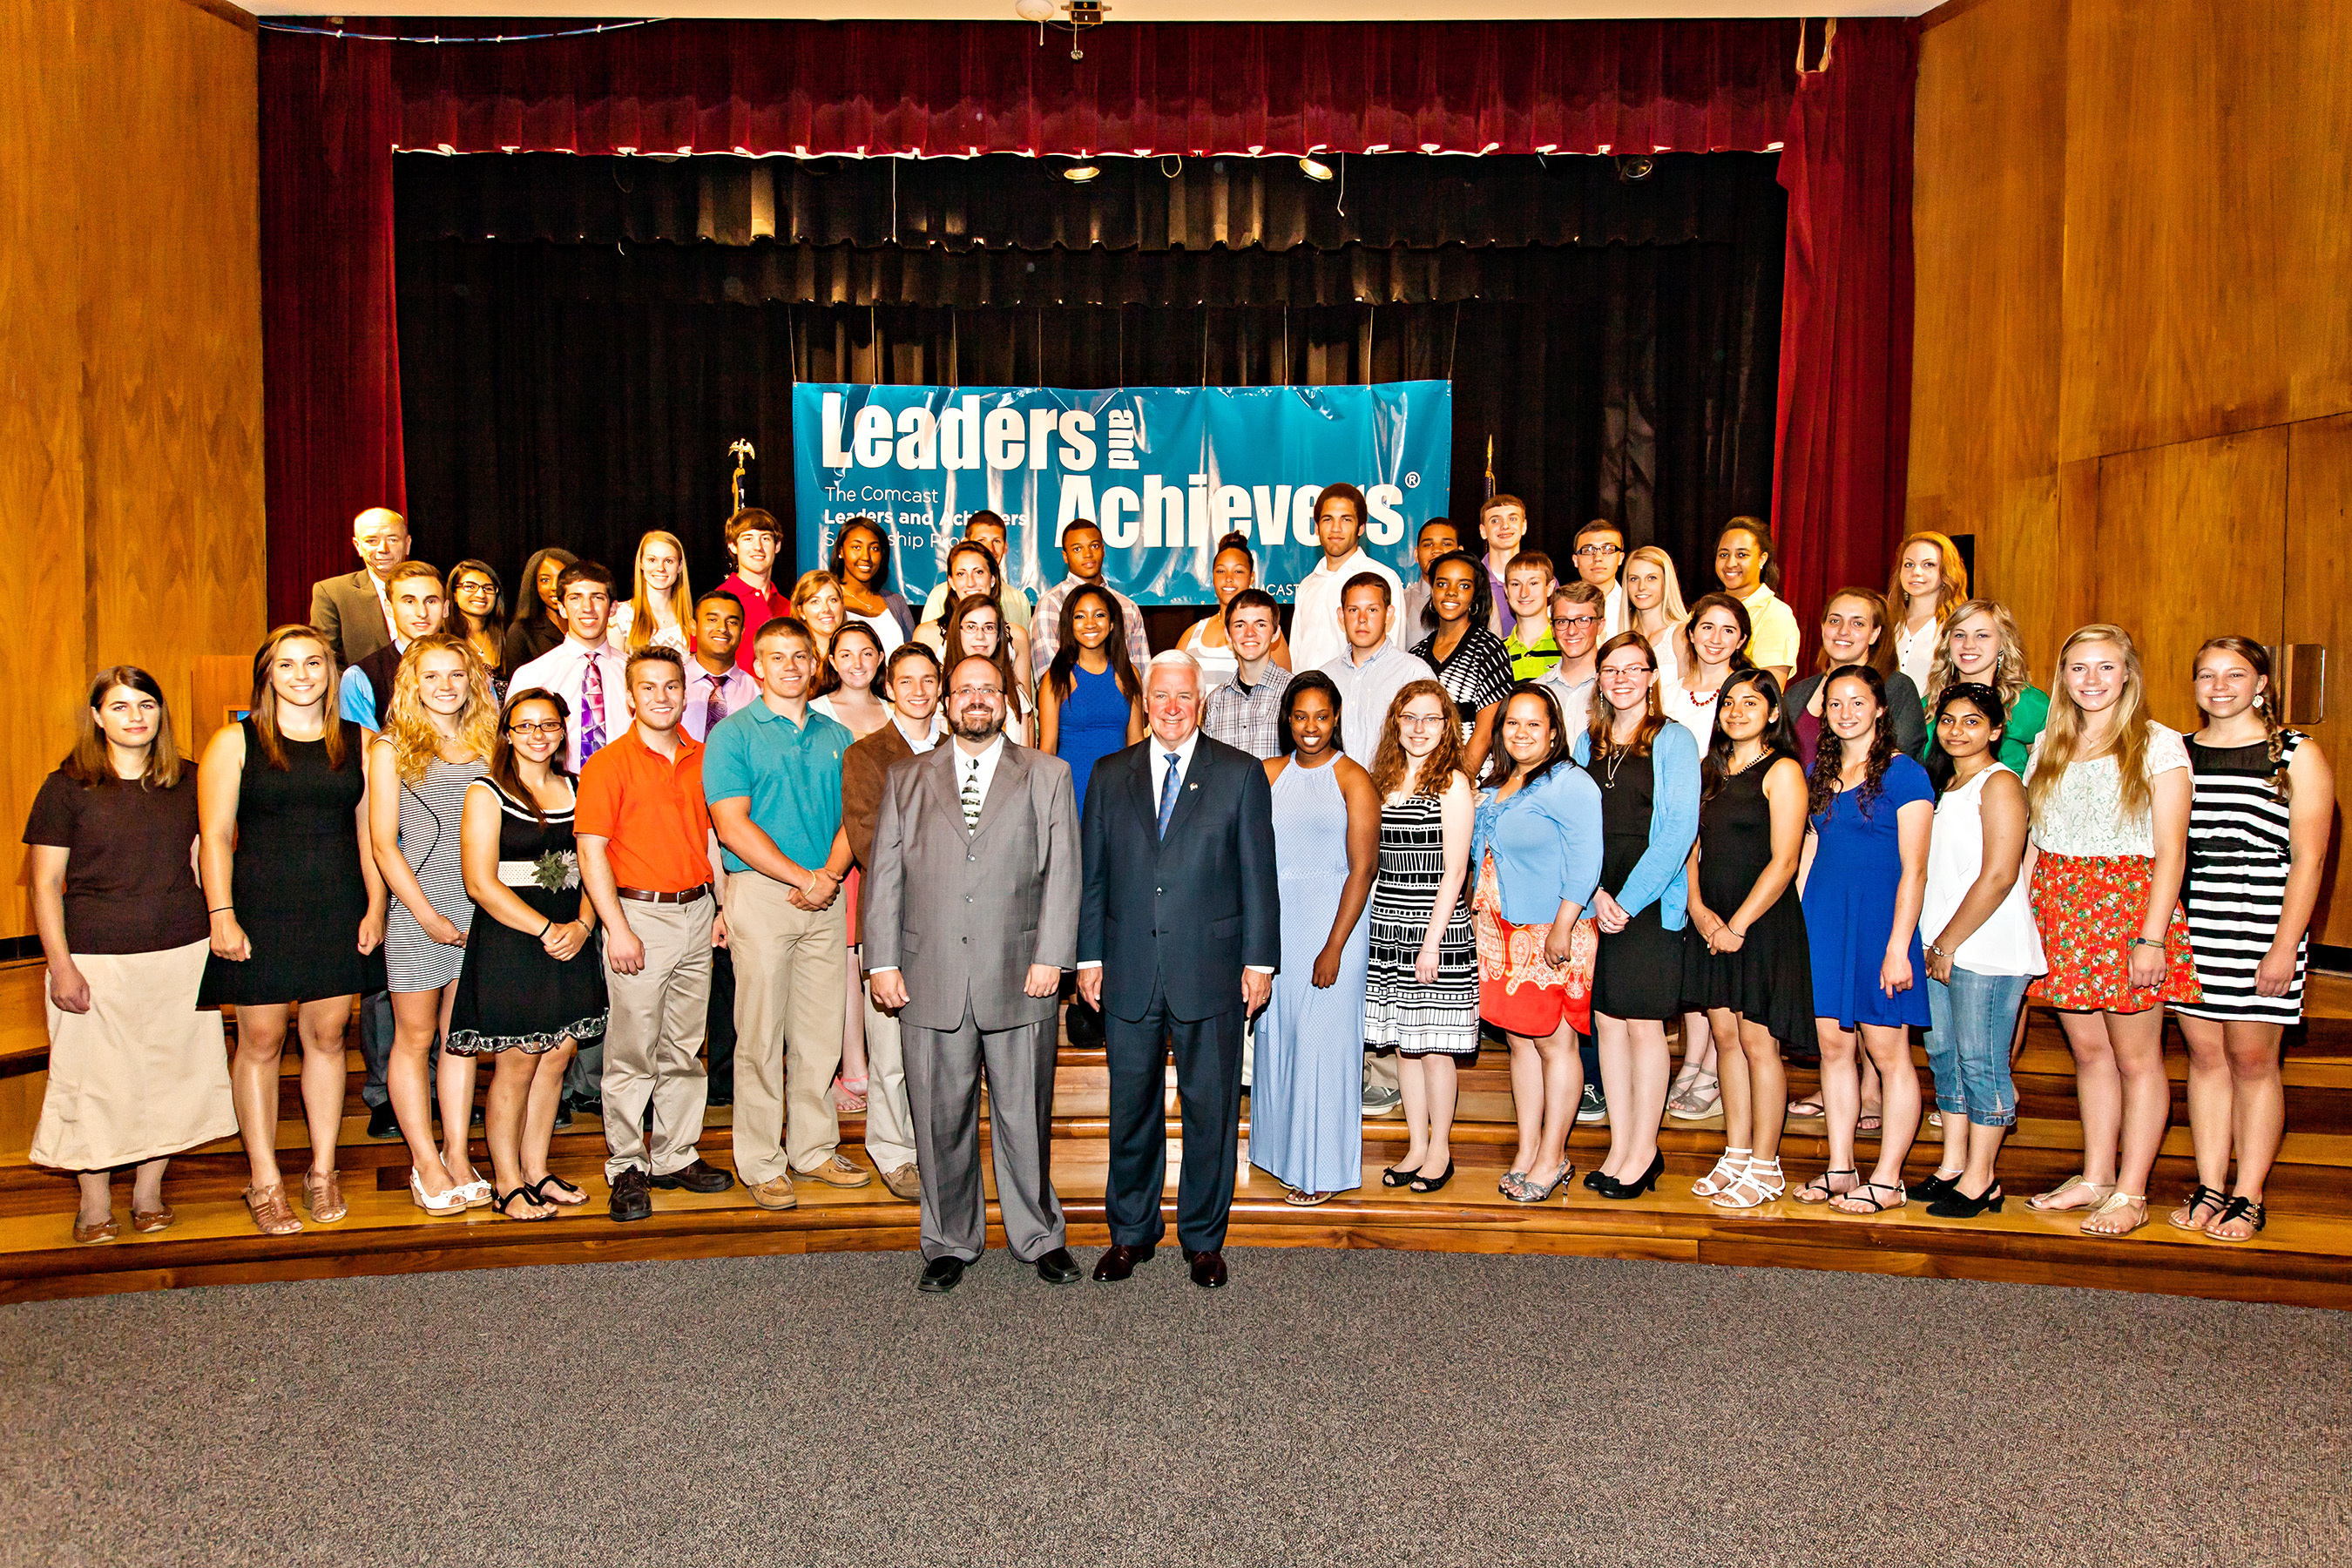 Pennsylvania Governor Tom Corbett (front right), Harrisburg Mayor Eric Papenfuse (front left), and Comcast Regional Vice President of Government Relations Frank Lynch (back row, left) are pictured with Pennsylvania high school seniors who were honored as Comcast Leaders & Achievers scholars at a ceremony in Harrisburg on Tuesday. (PRNewsFoto/Comcast Cable)